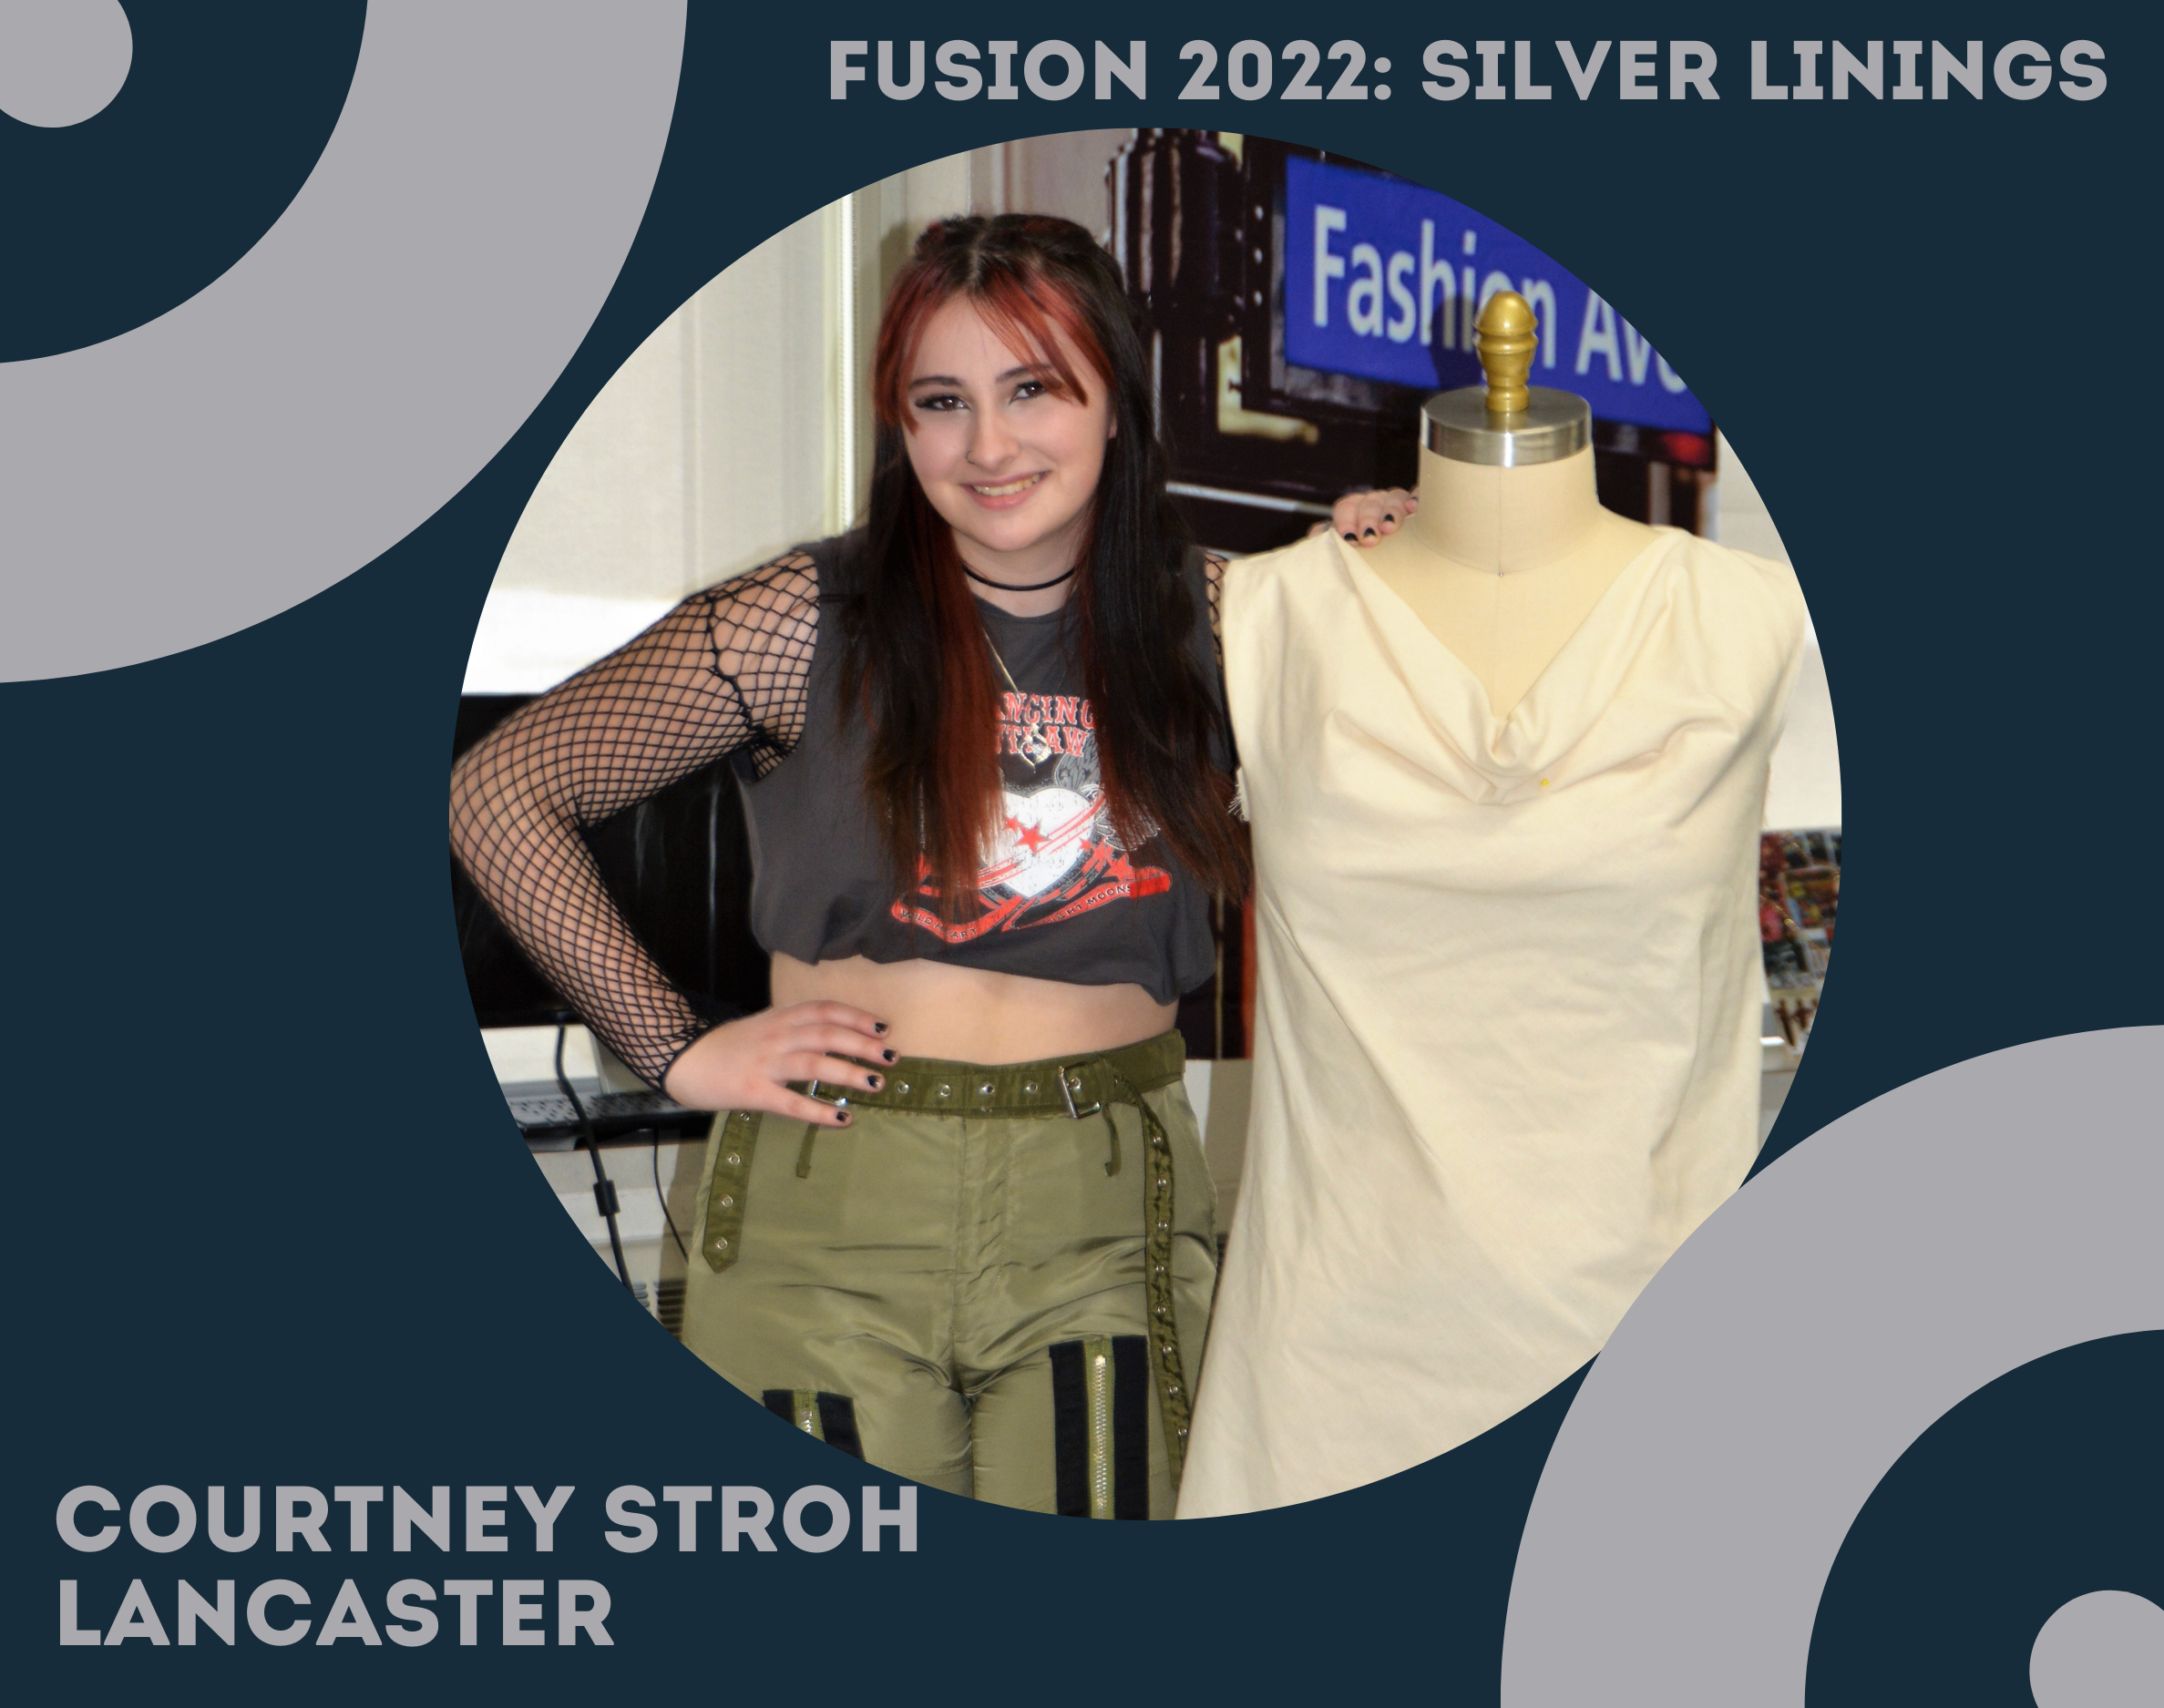 Fusion 2022: Silver Linings. Courtney Stroh, Lancaster